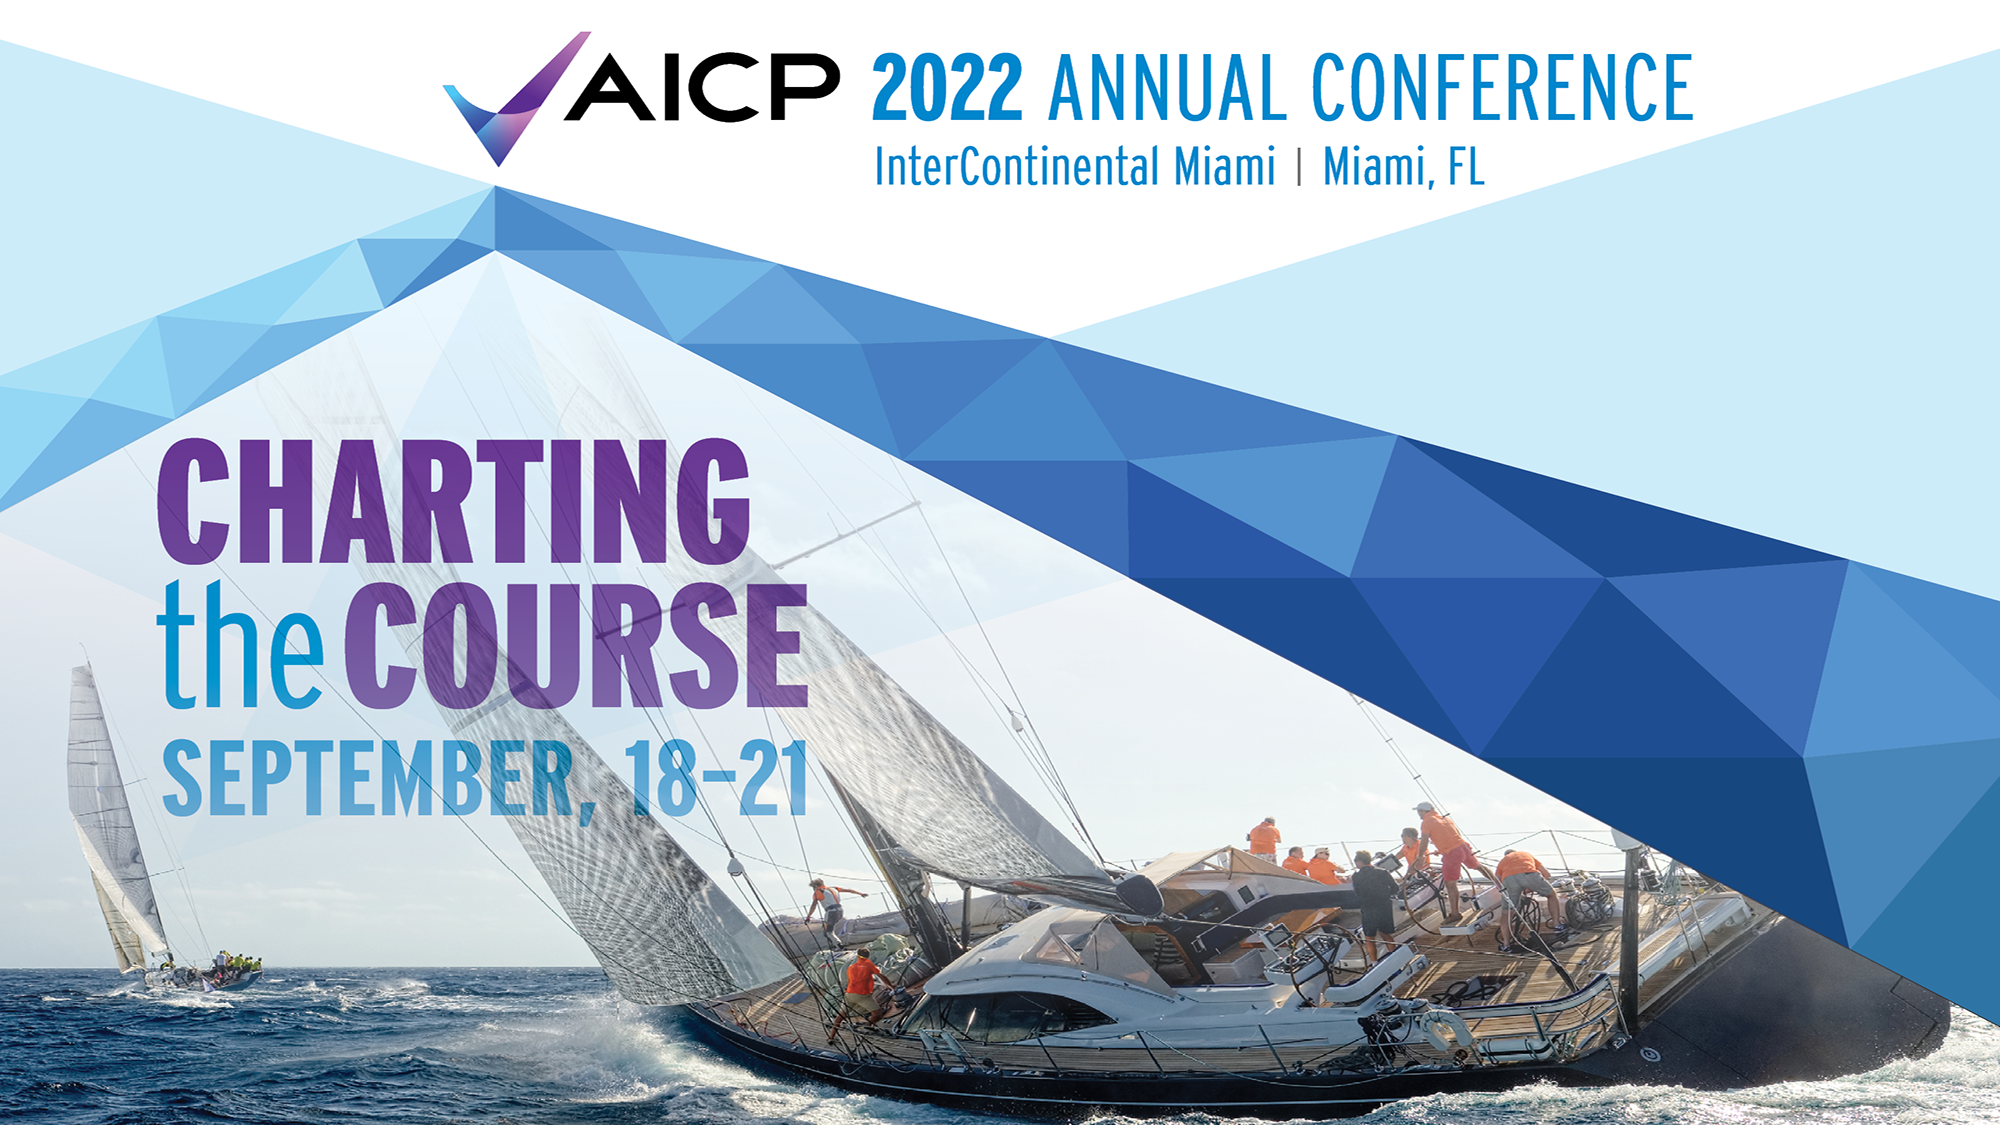 AICP 2022 Annual Conference